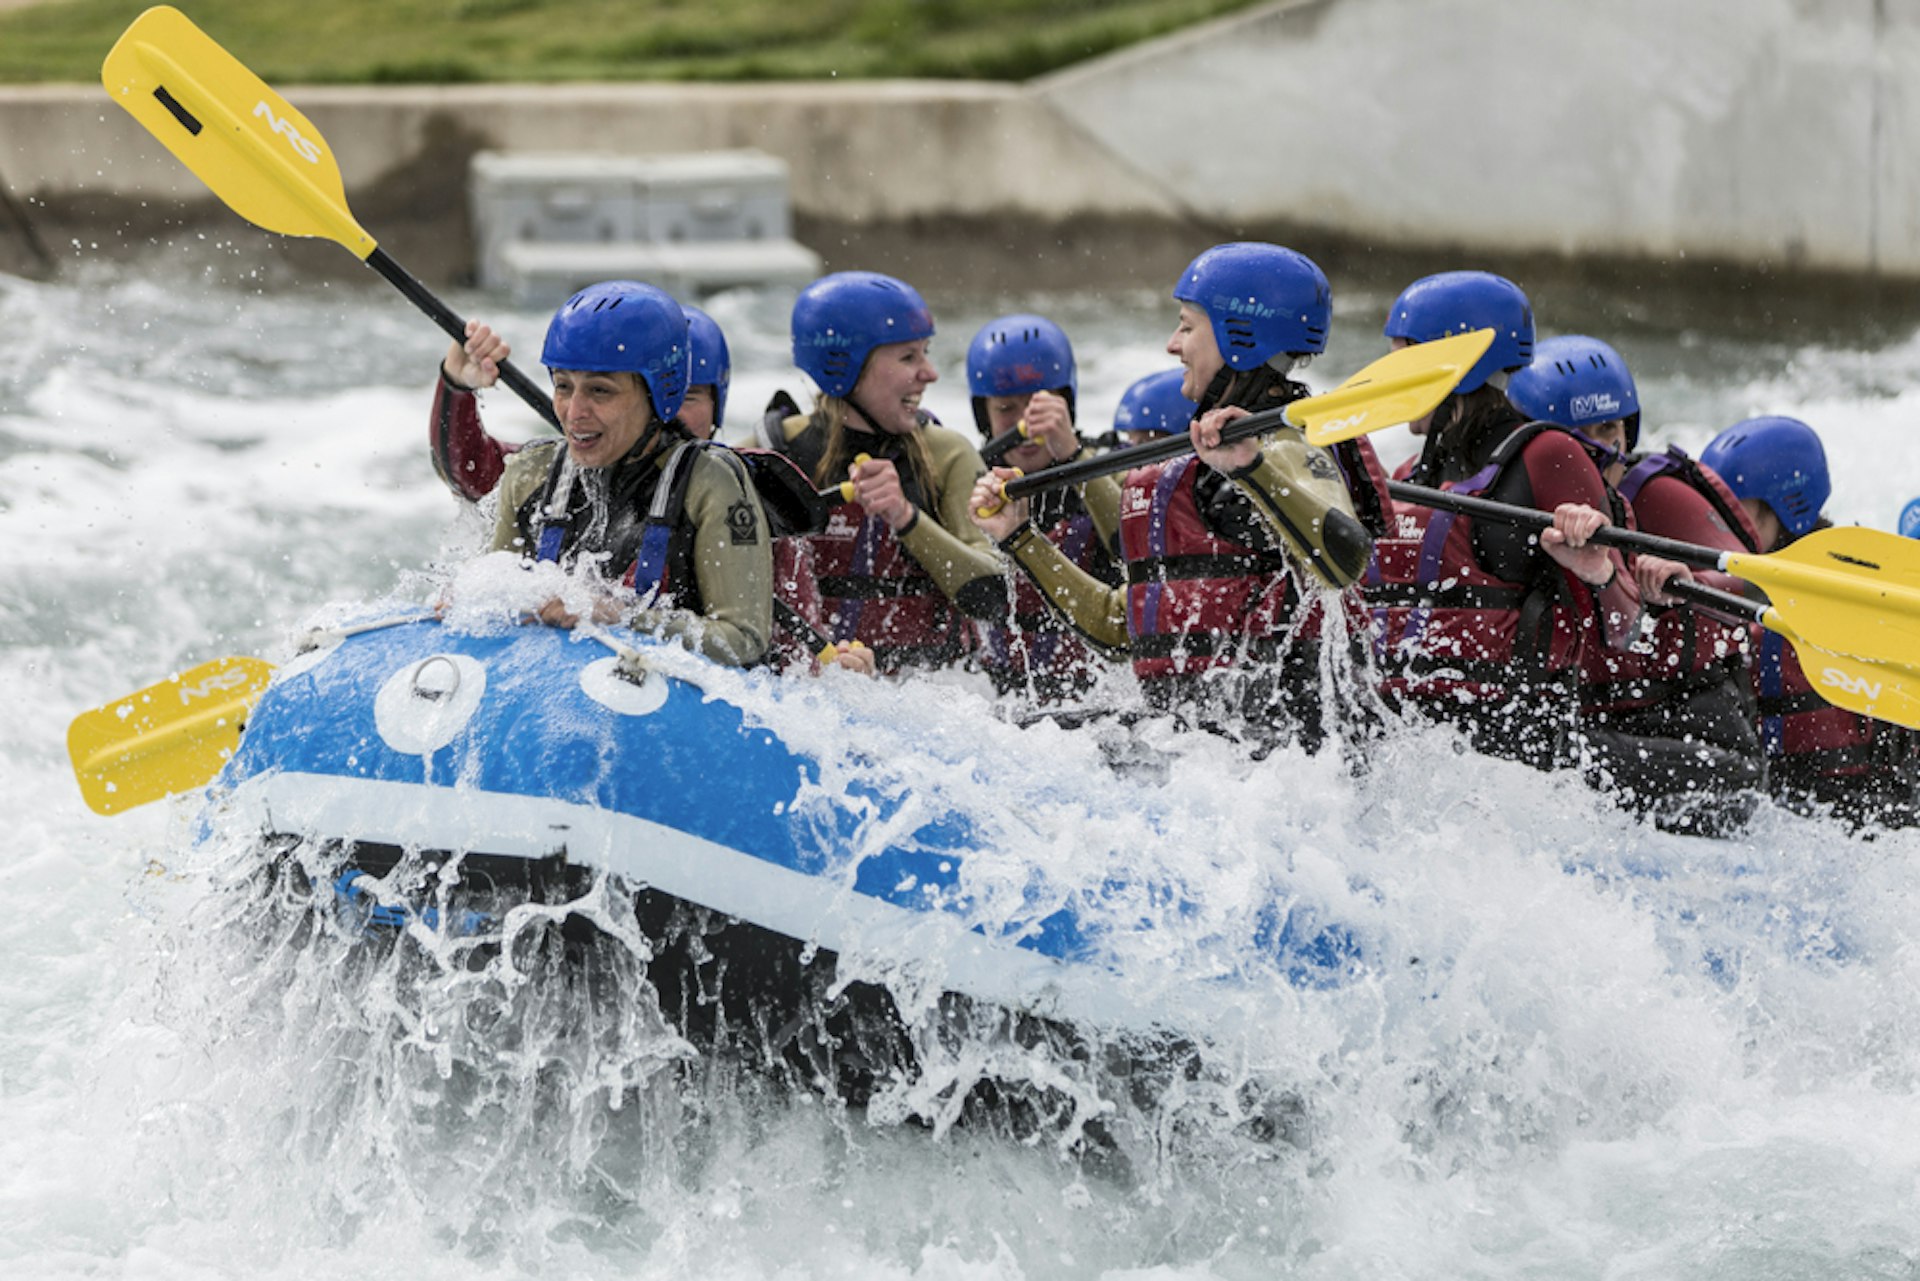 Rafting at Lee Valley. Image by Lee Valley White Water Centre